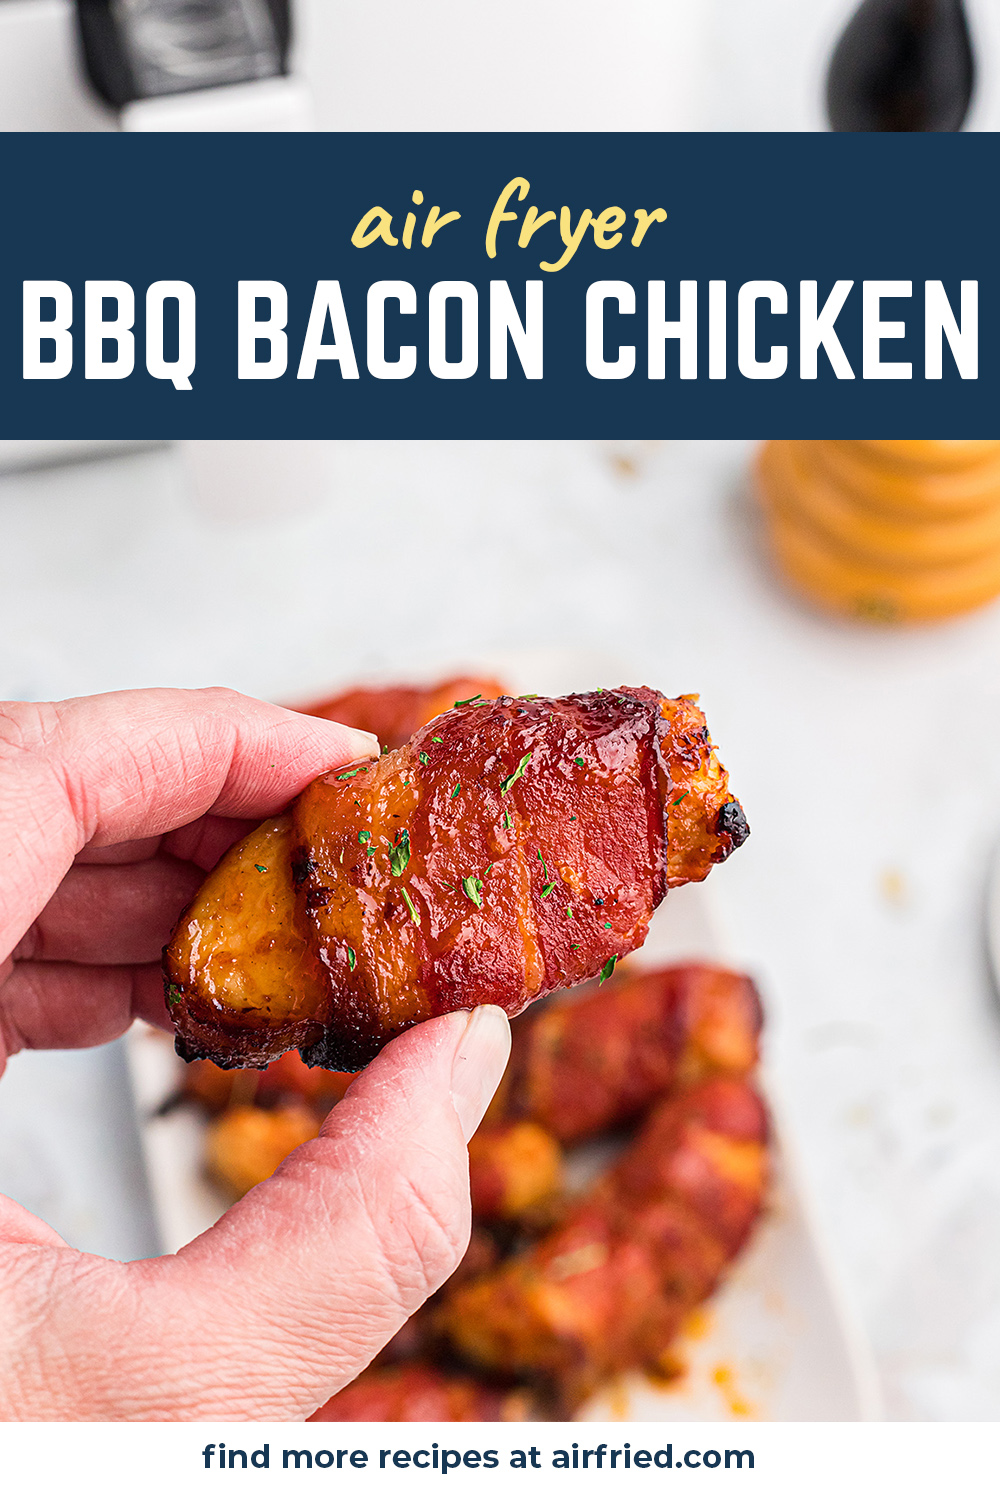 Bite-sized BBQ chicken bites can be made better with only one thing...BACON! #recipes #airfryer #appetizers